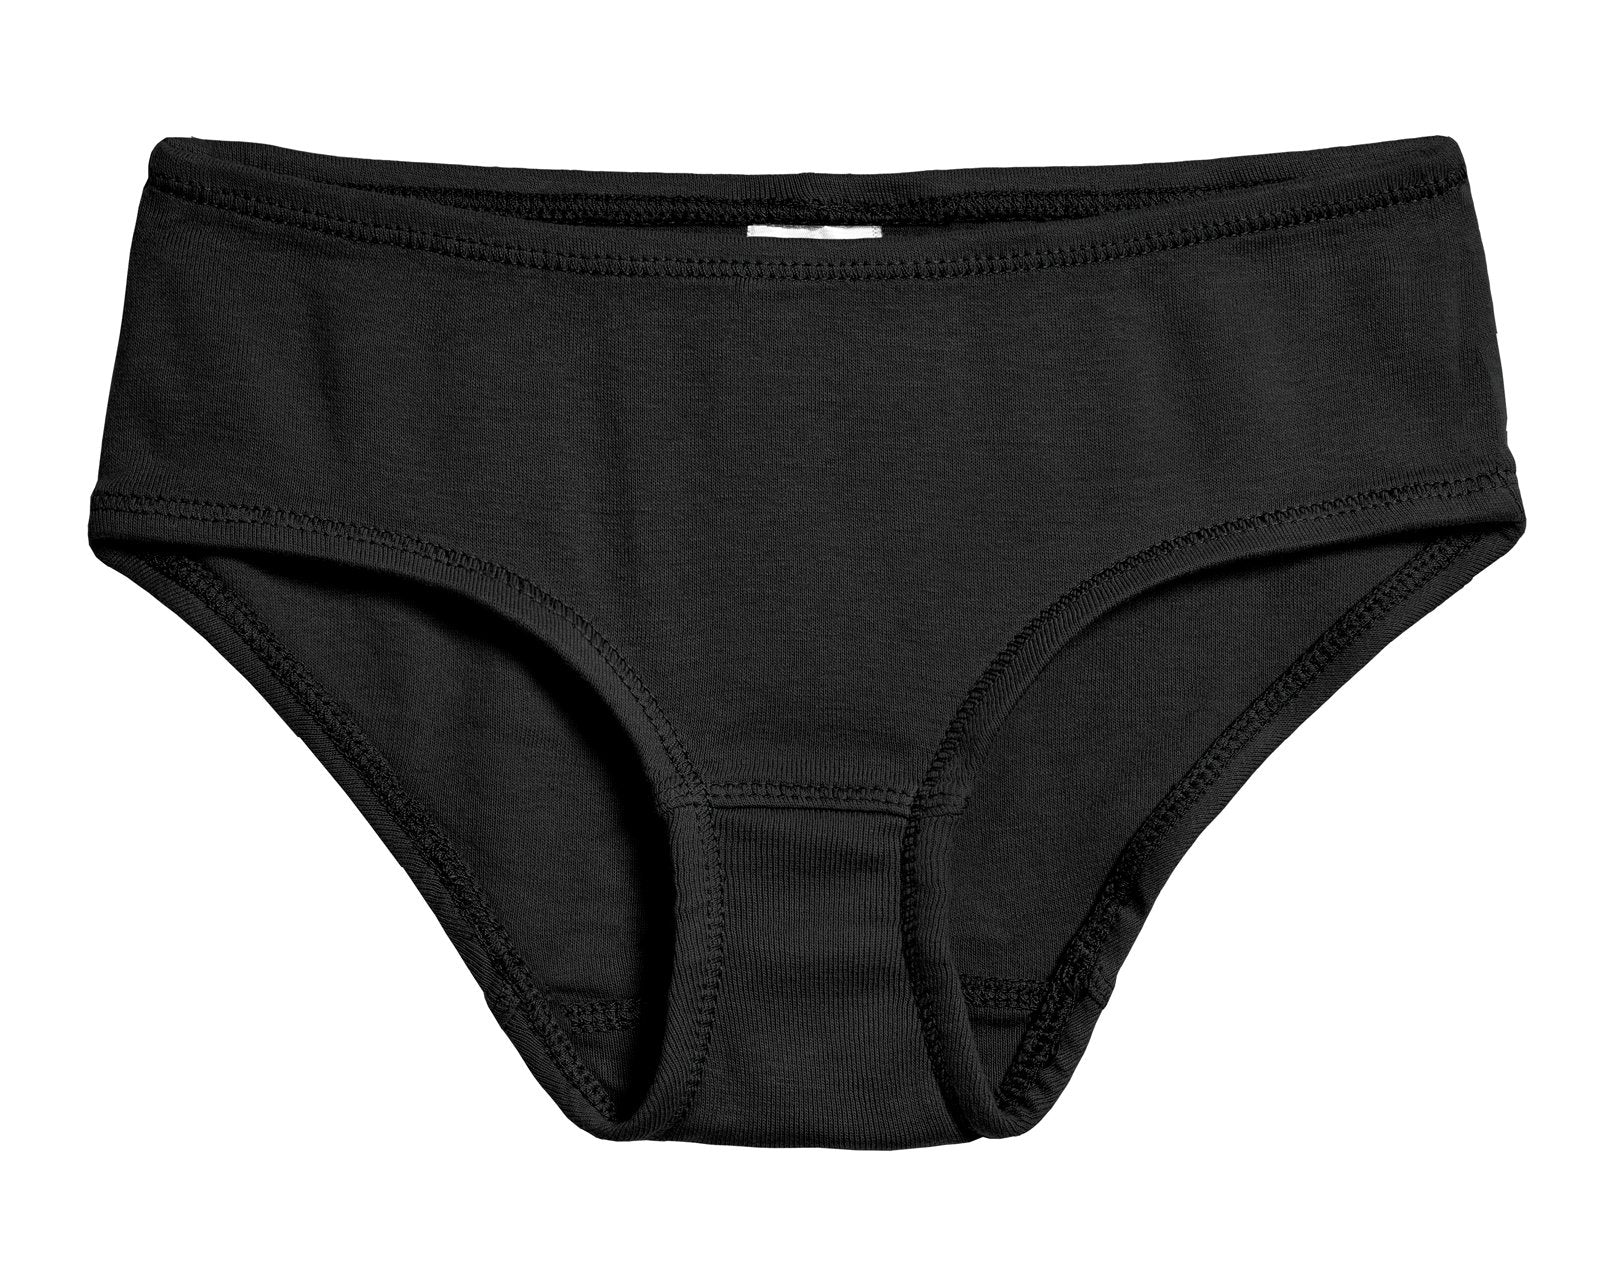  Kiench Teens Underwear Girls' Cotton Hipster Panties Basic  Briefs 5 Pack [US S/Kids Size 12-14/10-12 Years, CN L], Black: Clothing,  Shoes & Jewelry